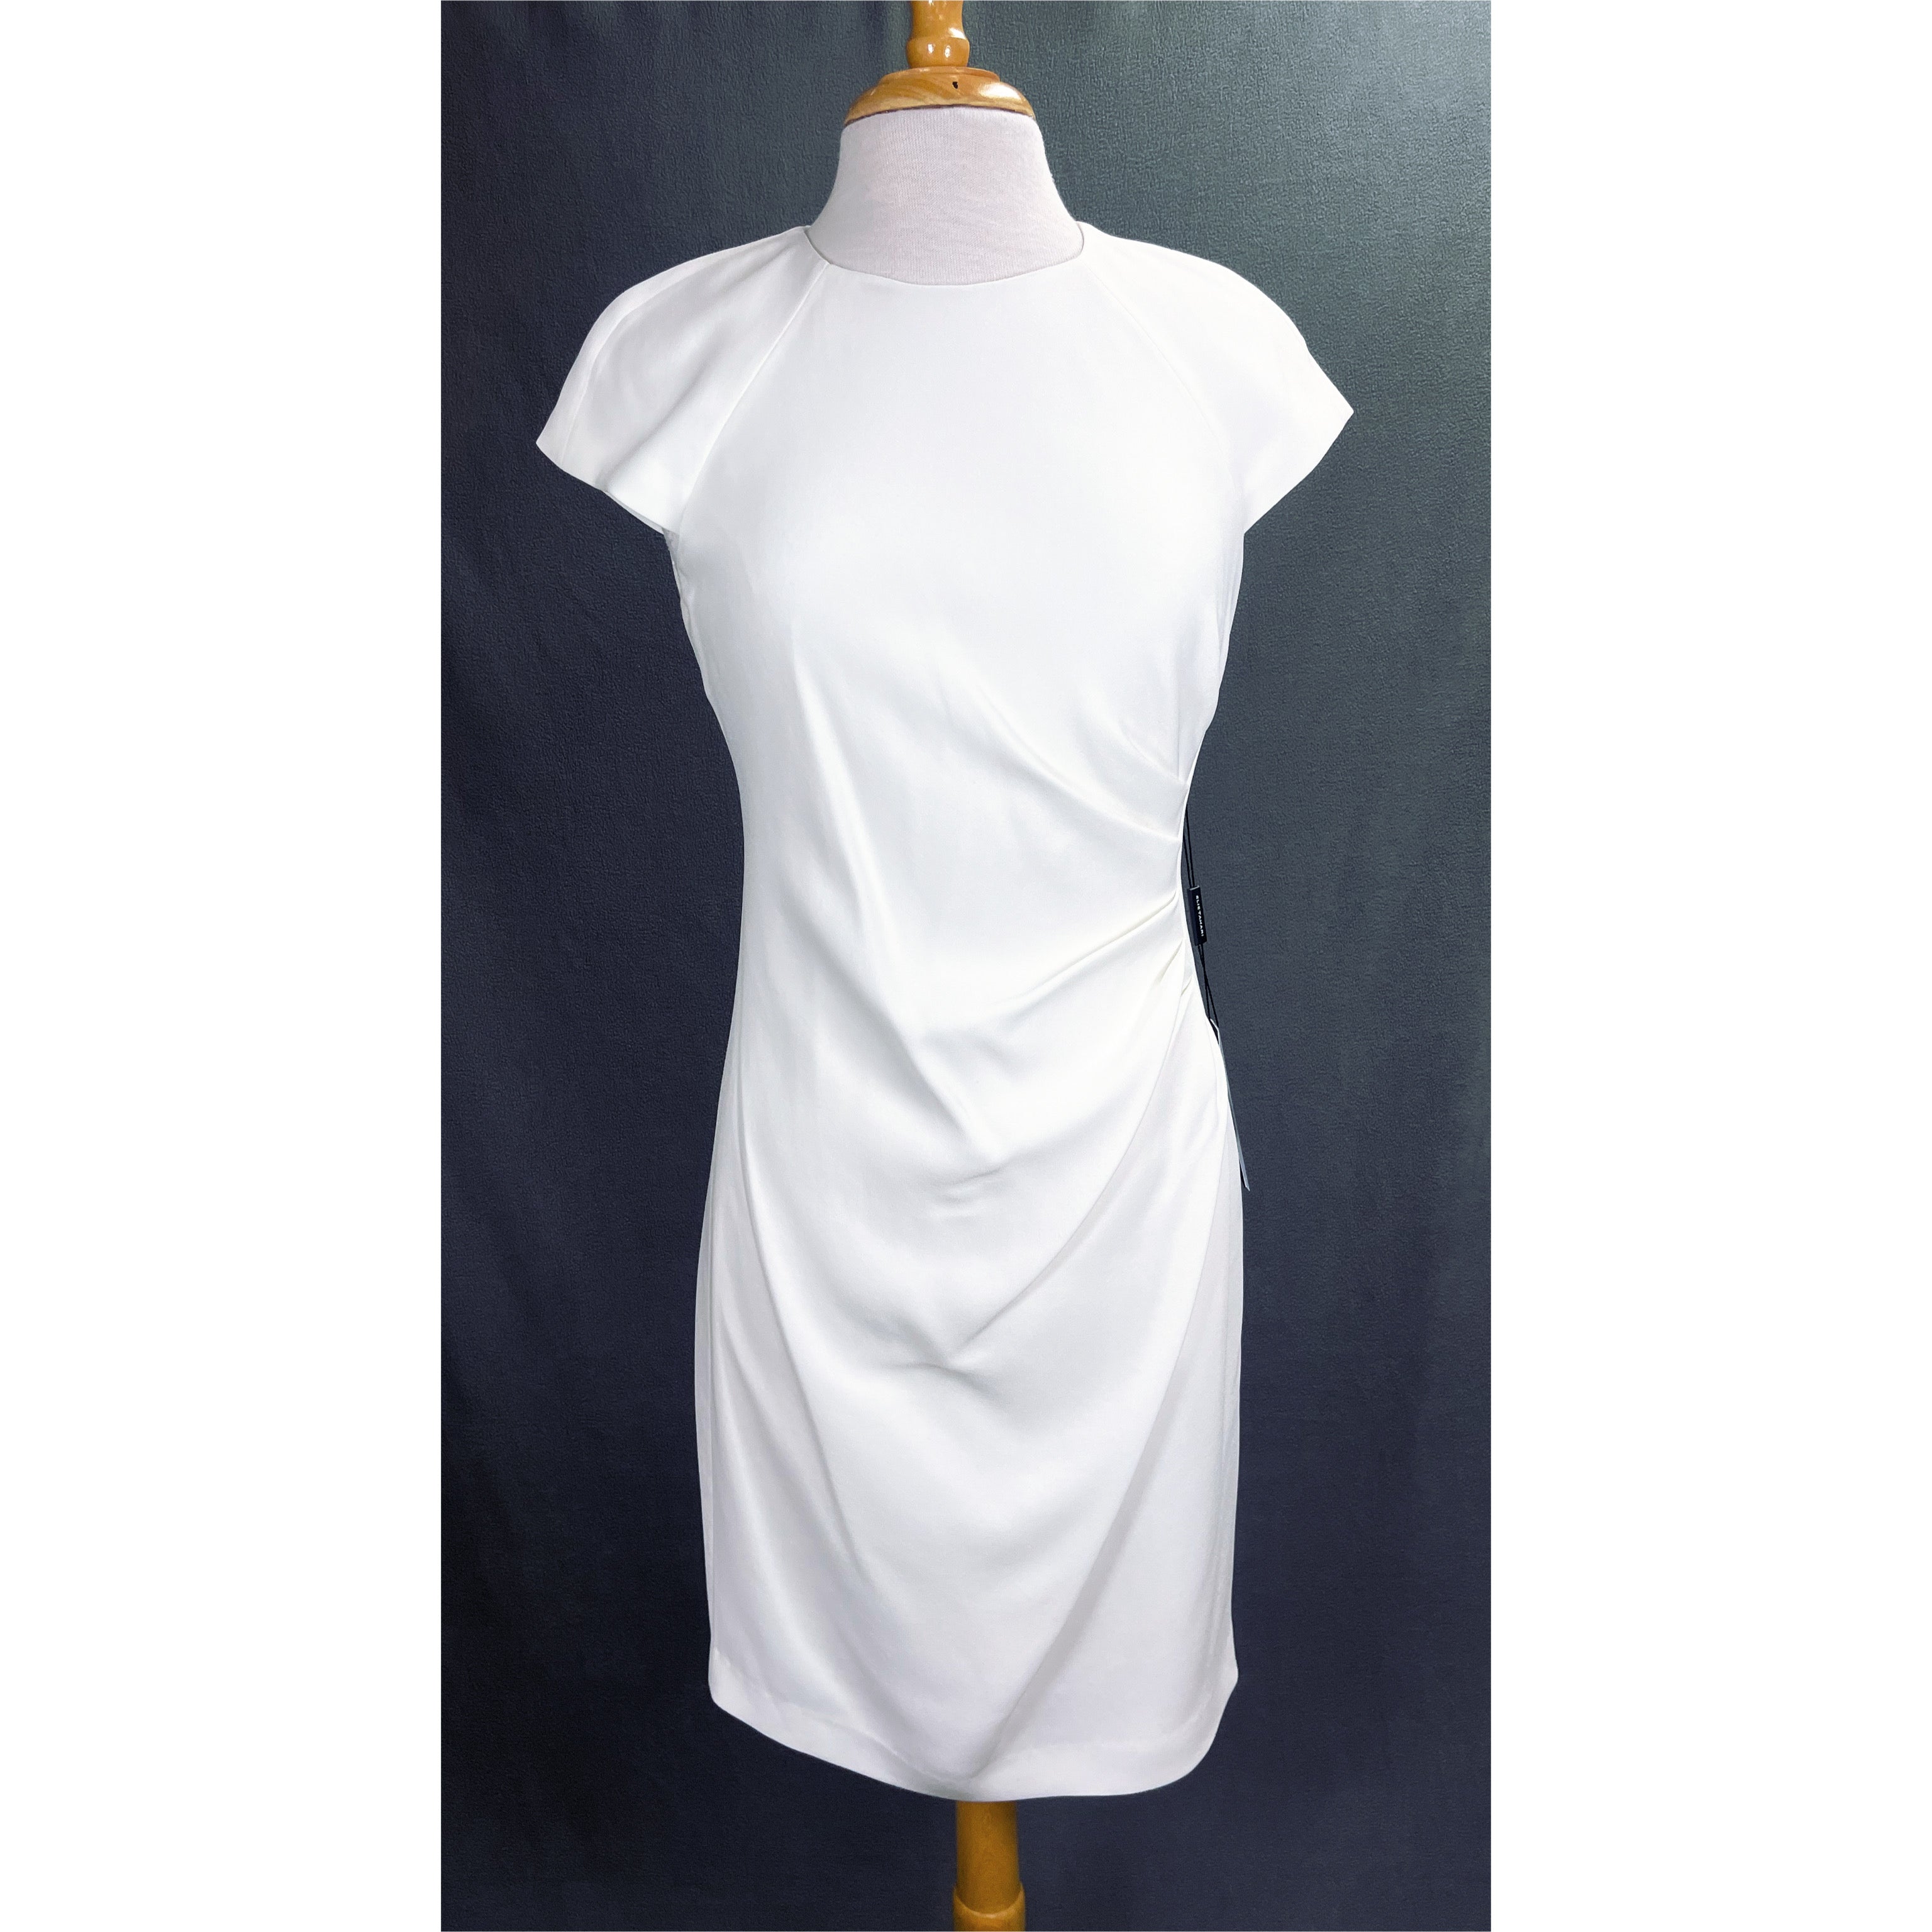 Elie Tahari ivory dress size 8, NEW WITH TAGS!